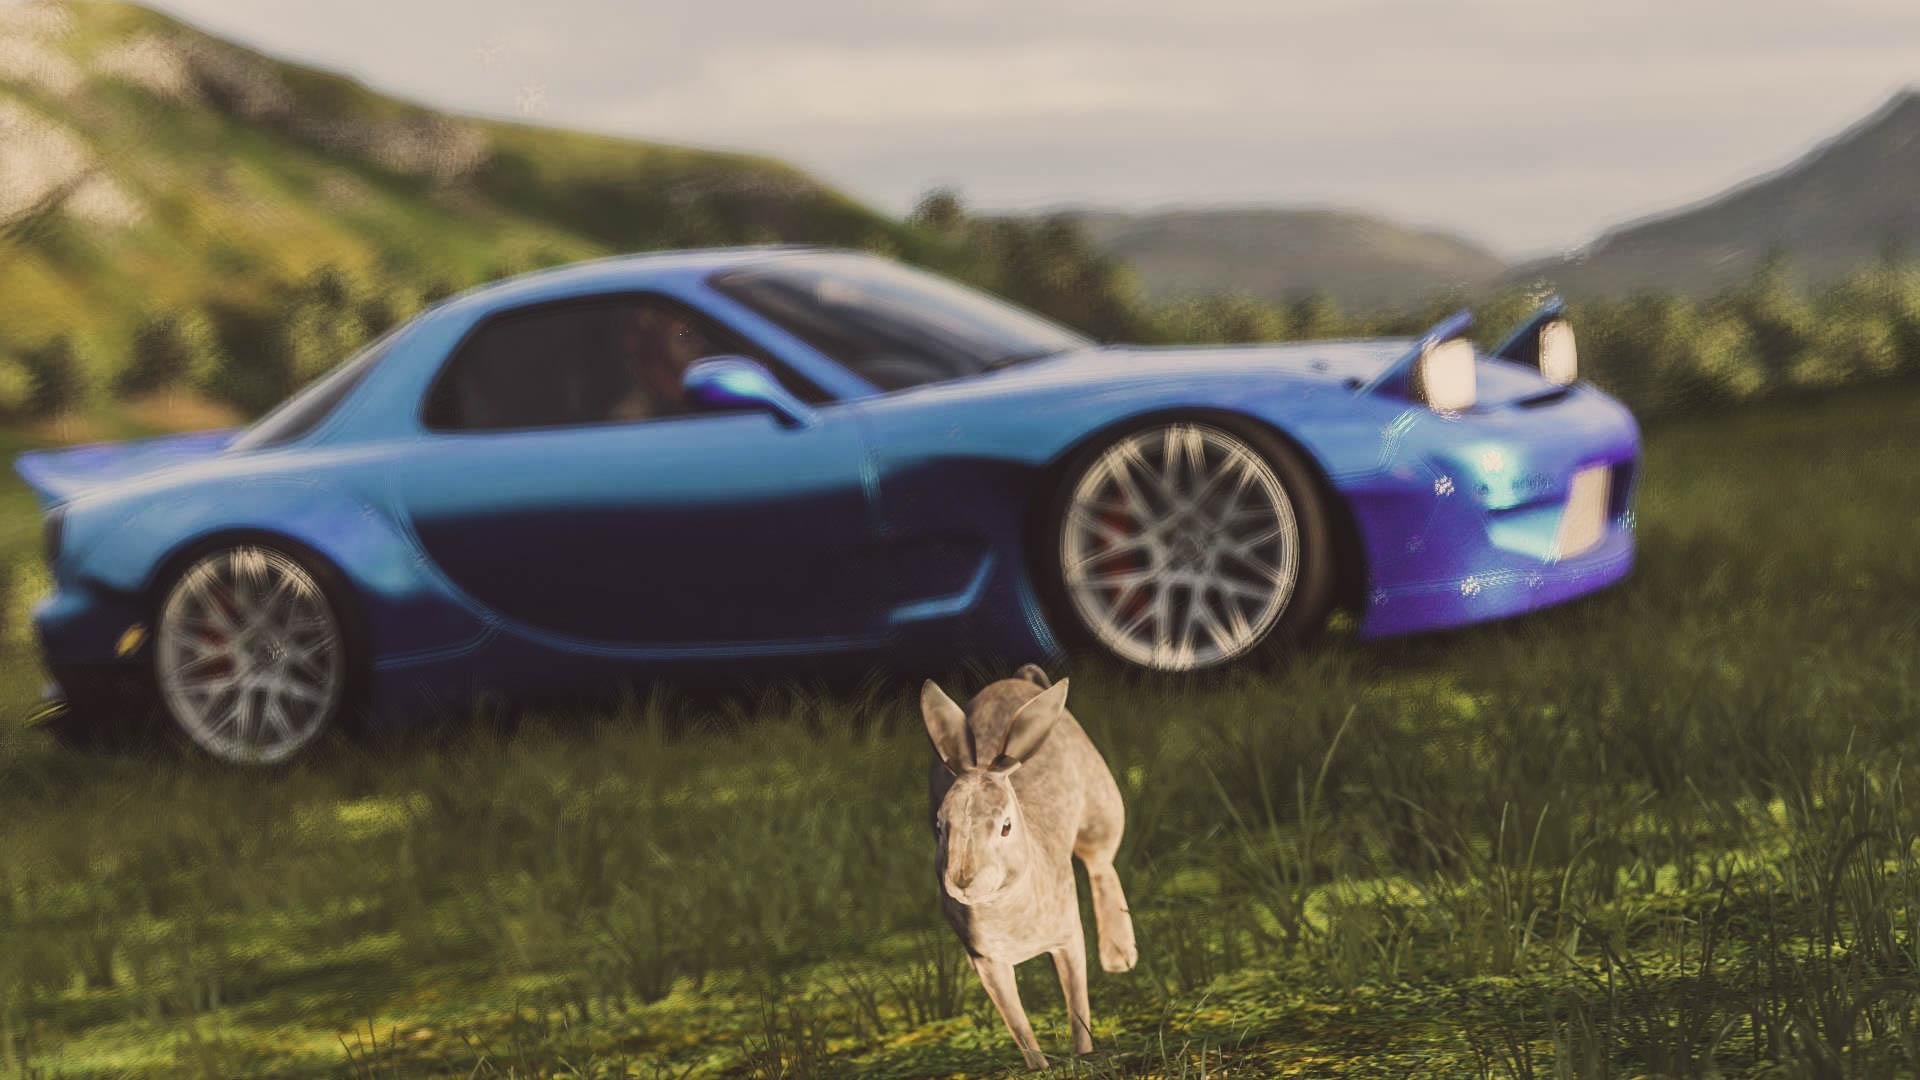 Fh4 My Rocket Bunny And A Rx7 In The Background Forza